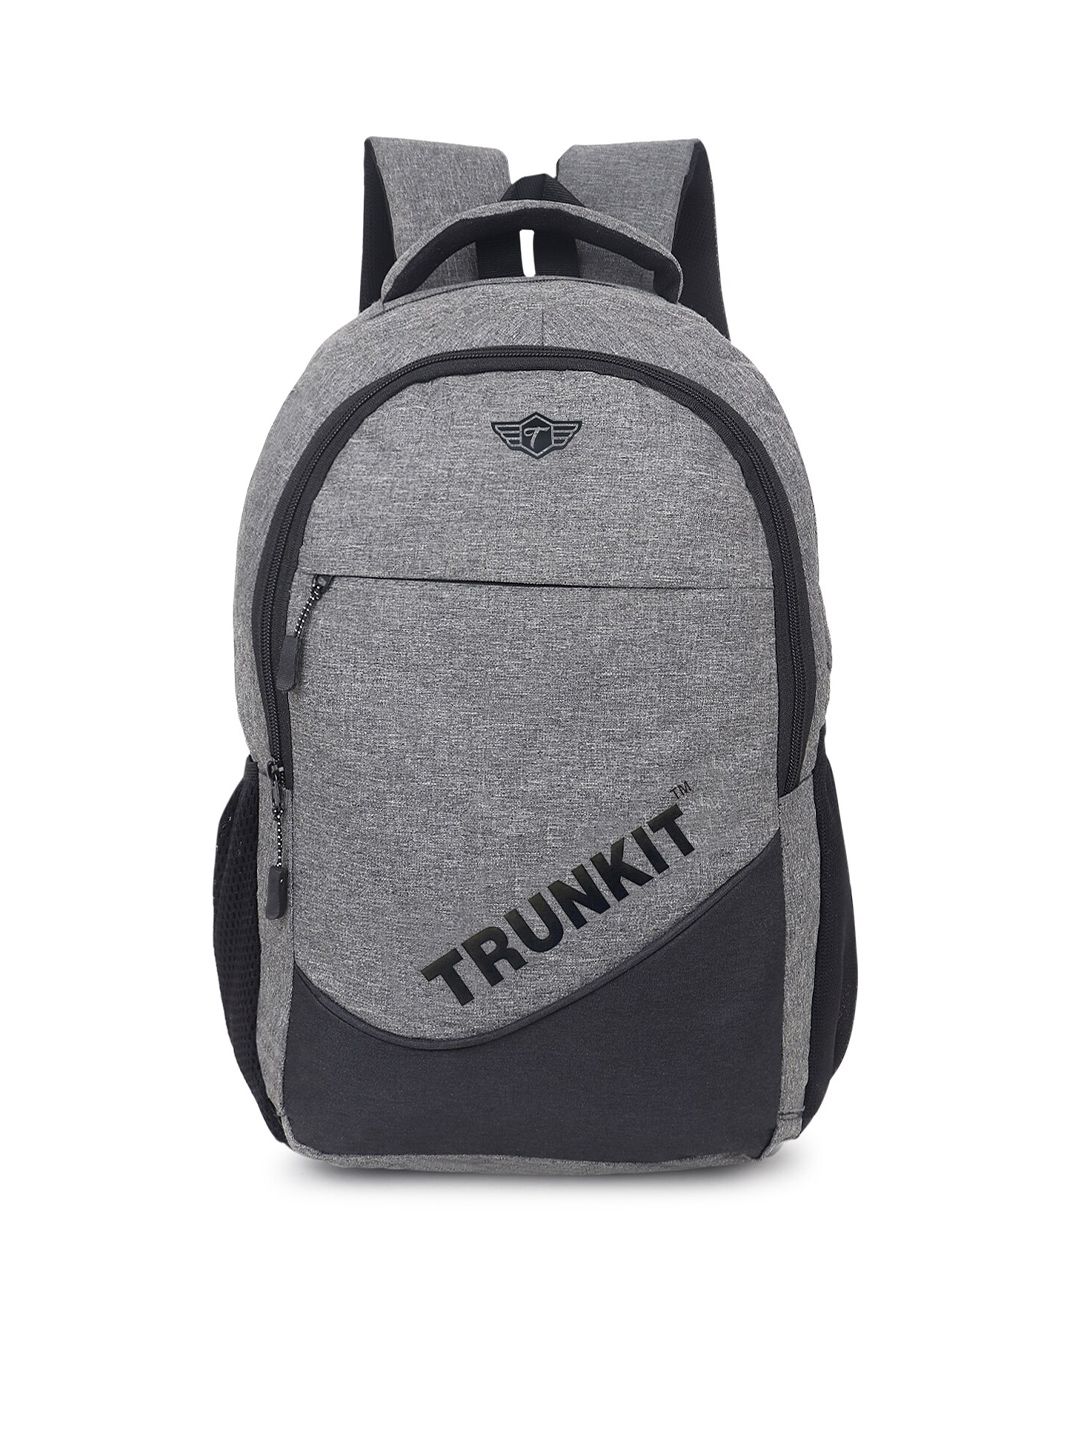 TRUNKIT Unisex Grey Textured 30 L Laptop Backpack Price in India